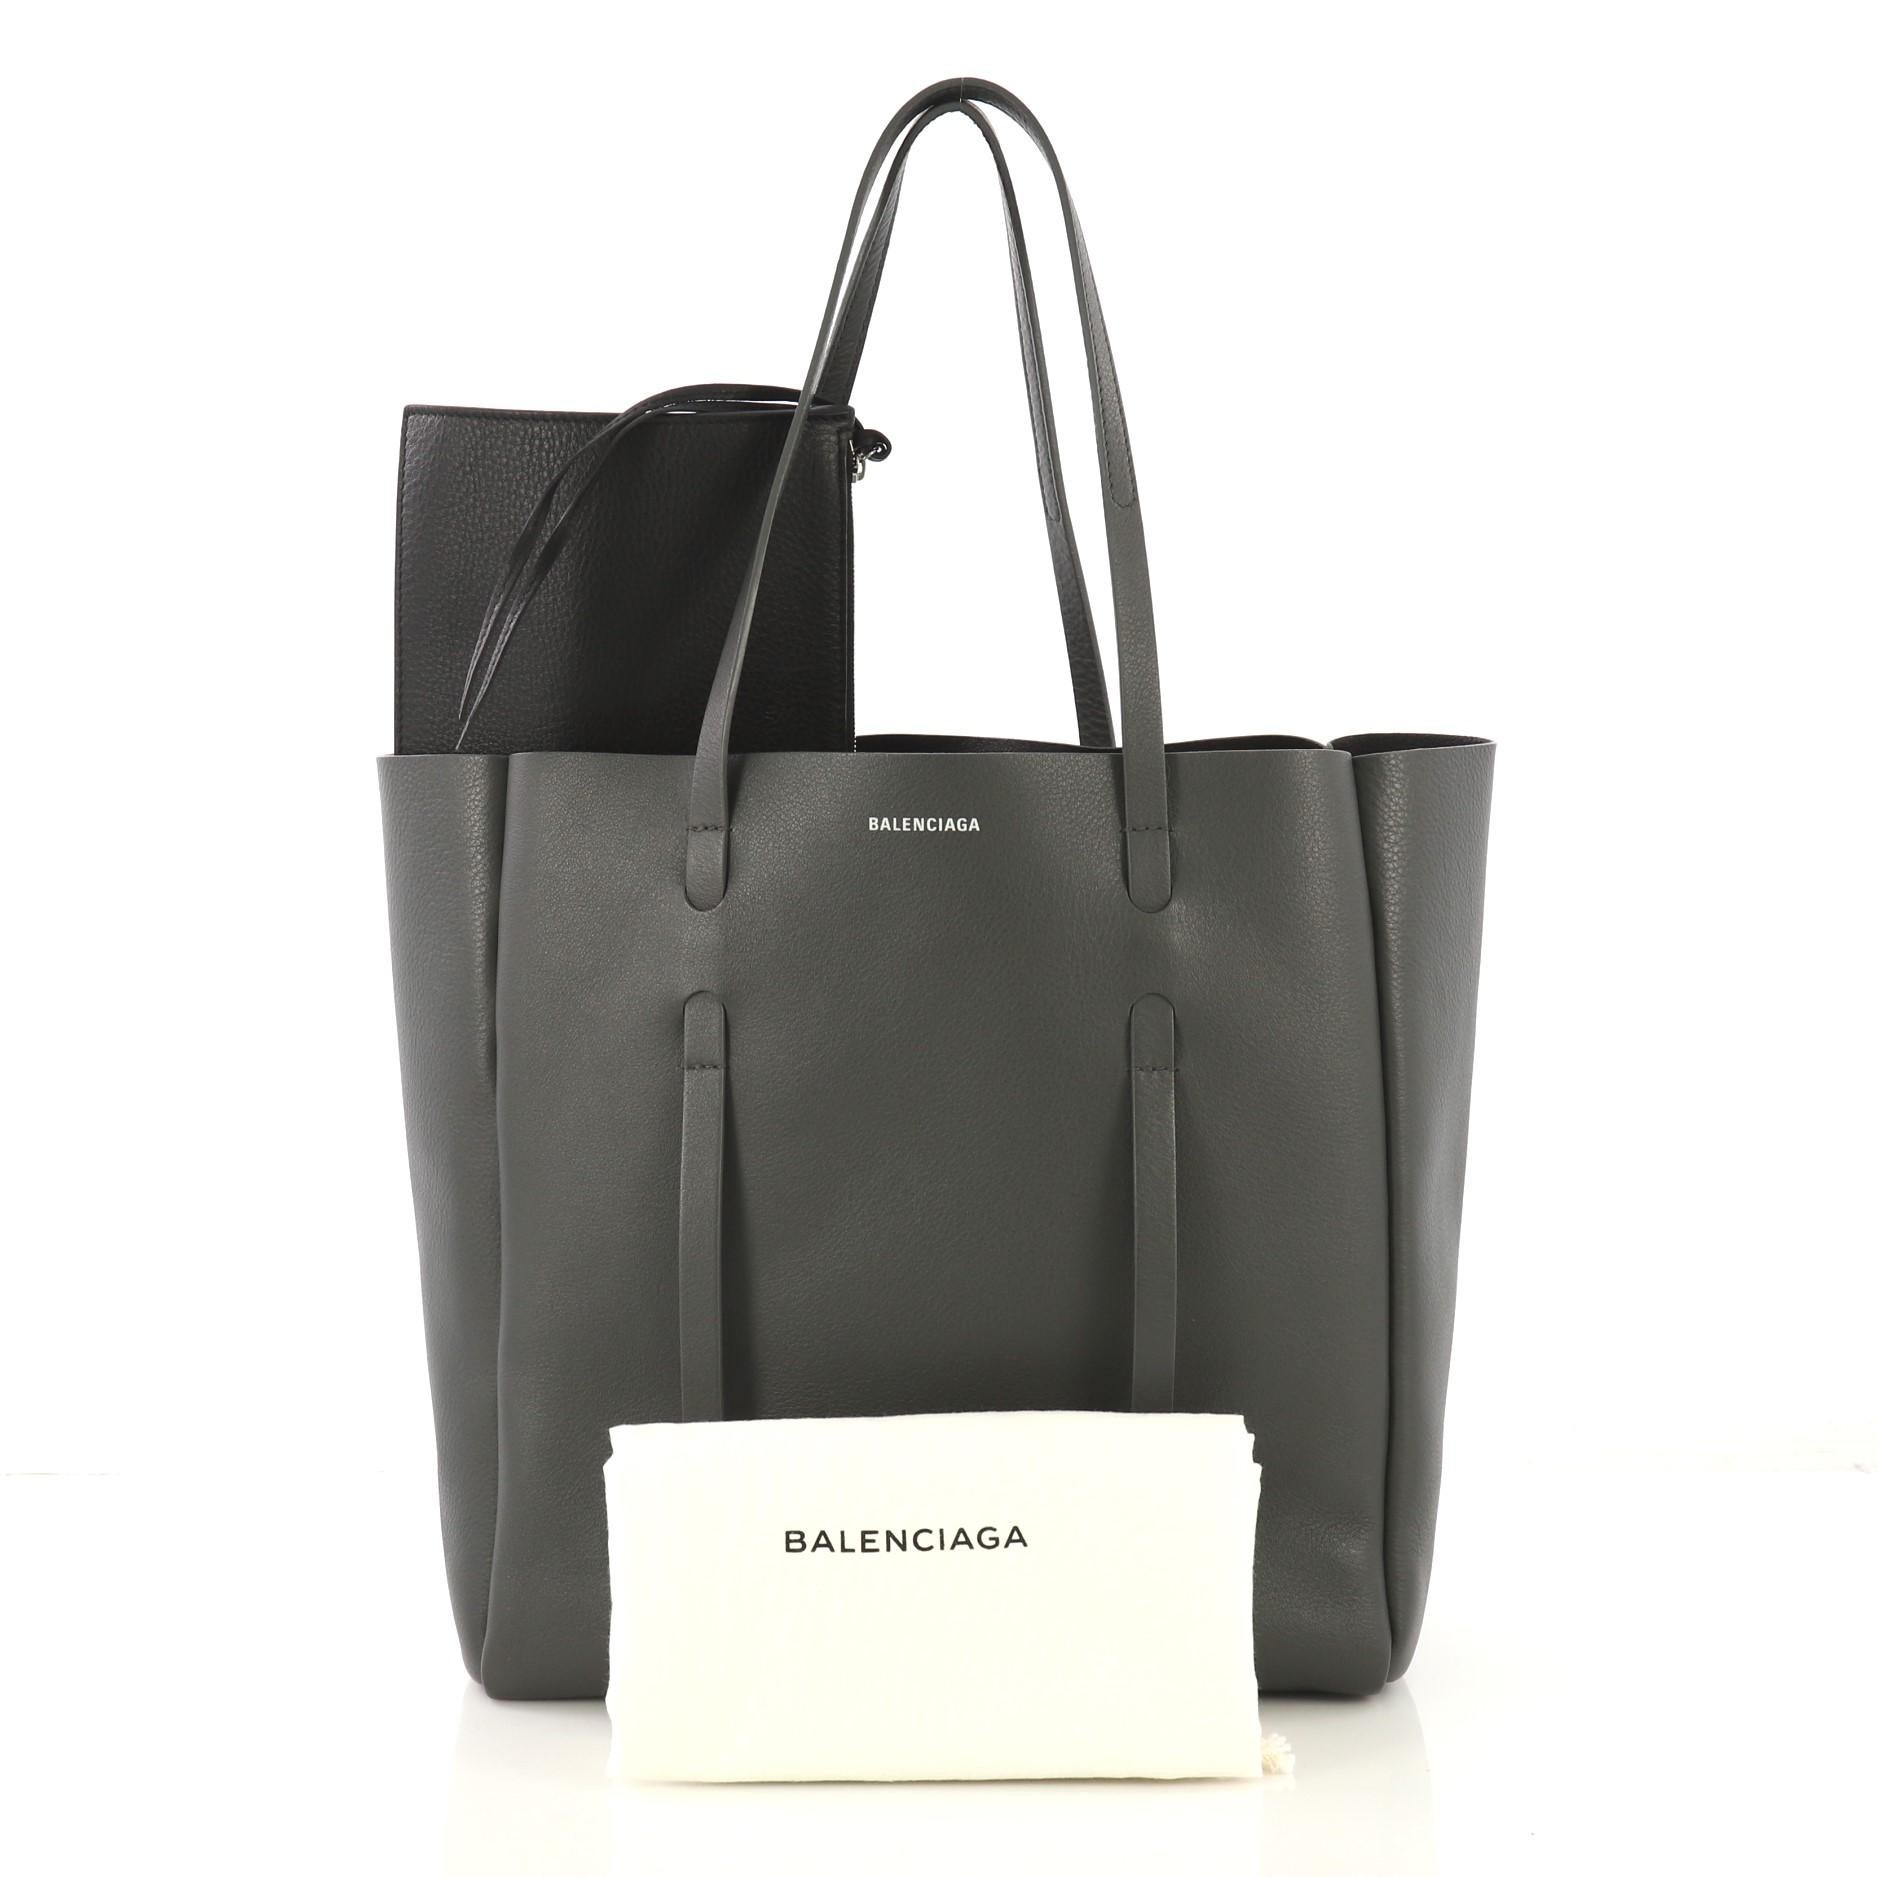 This Balenciaga Everyday Tote Leather Small, crafted from gray leather, features dual slim handles and silver-tone hardware. It opens to a black leather interior. 

Estimated Retail Price: $1,185
Condition: Great. Minor wear on base corners, slight